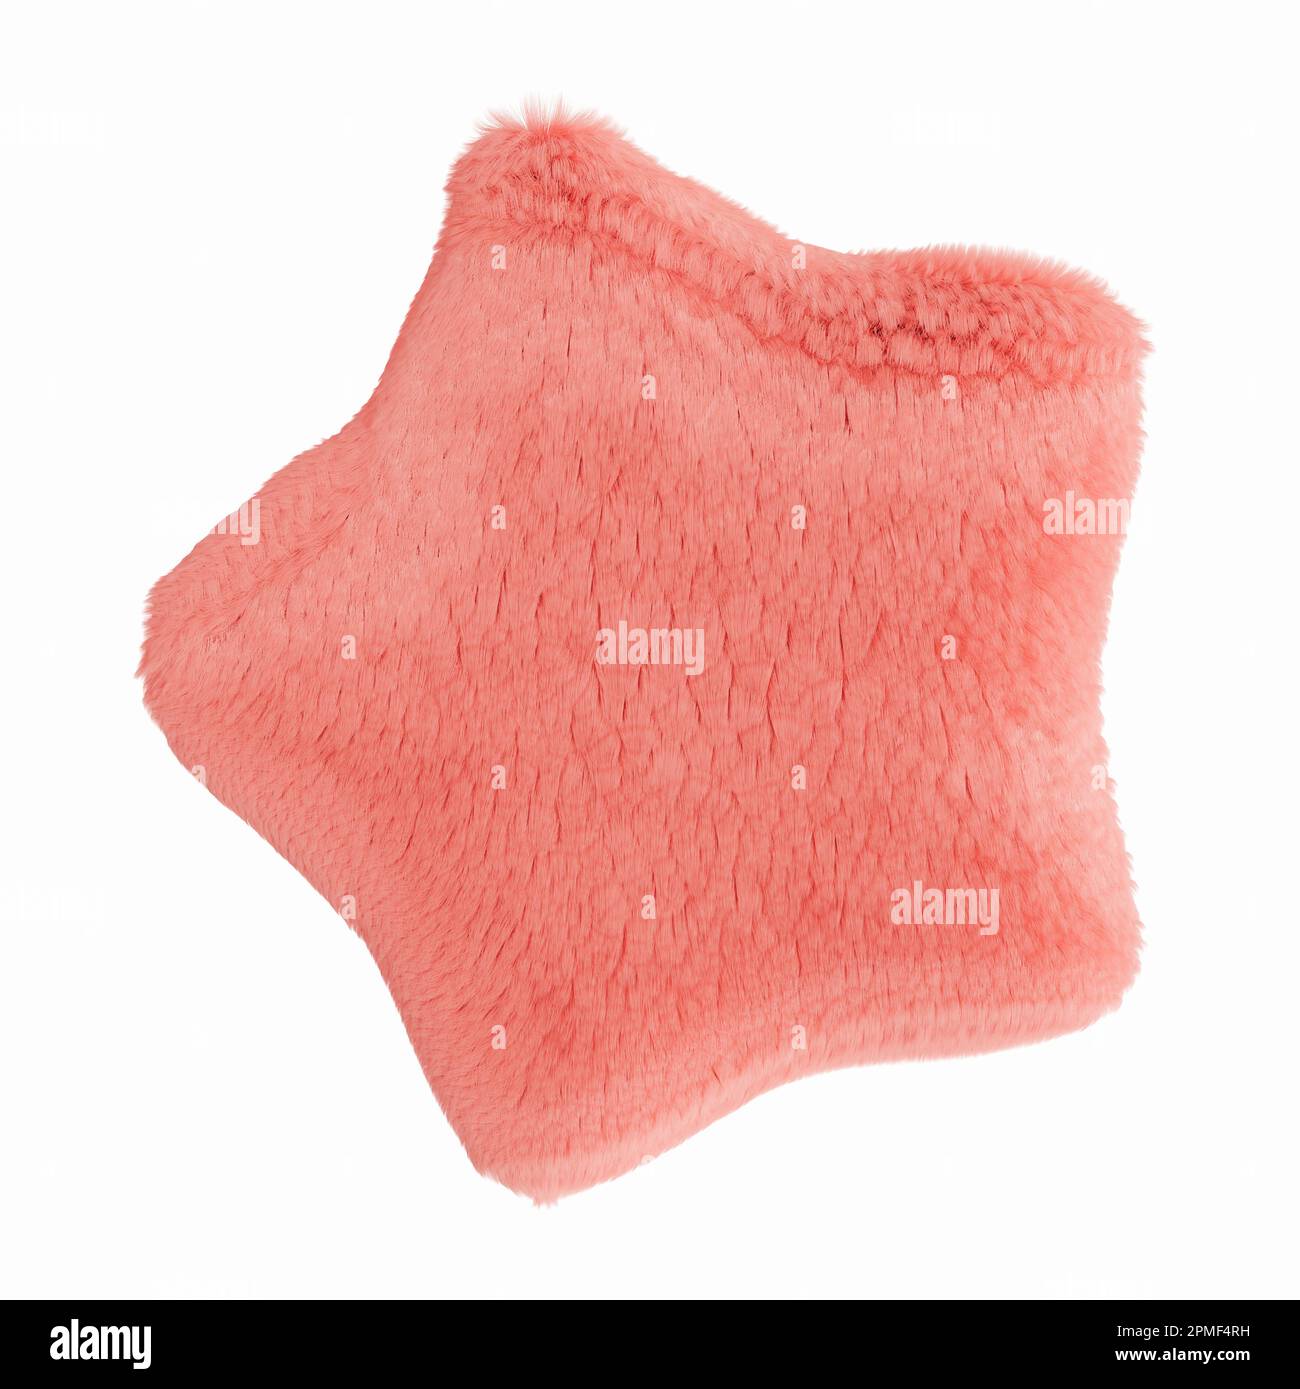 Fluffy pink 3D shape, isolated on white background. Furry, soft and hairy star. Trendy, cute design element. Cut out object. 3D rendering. Stock Photo